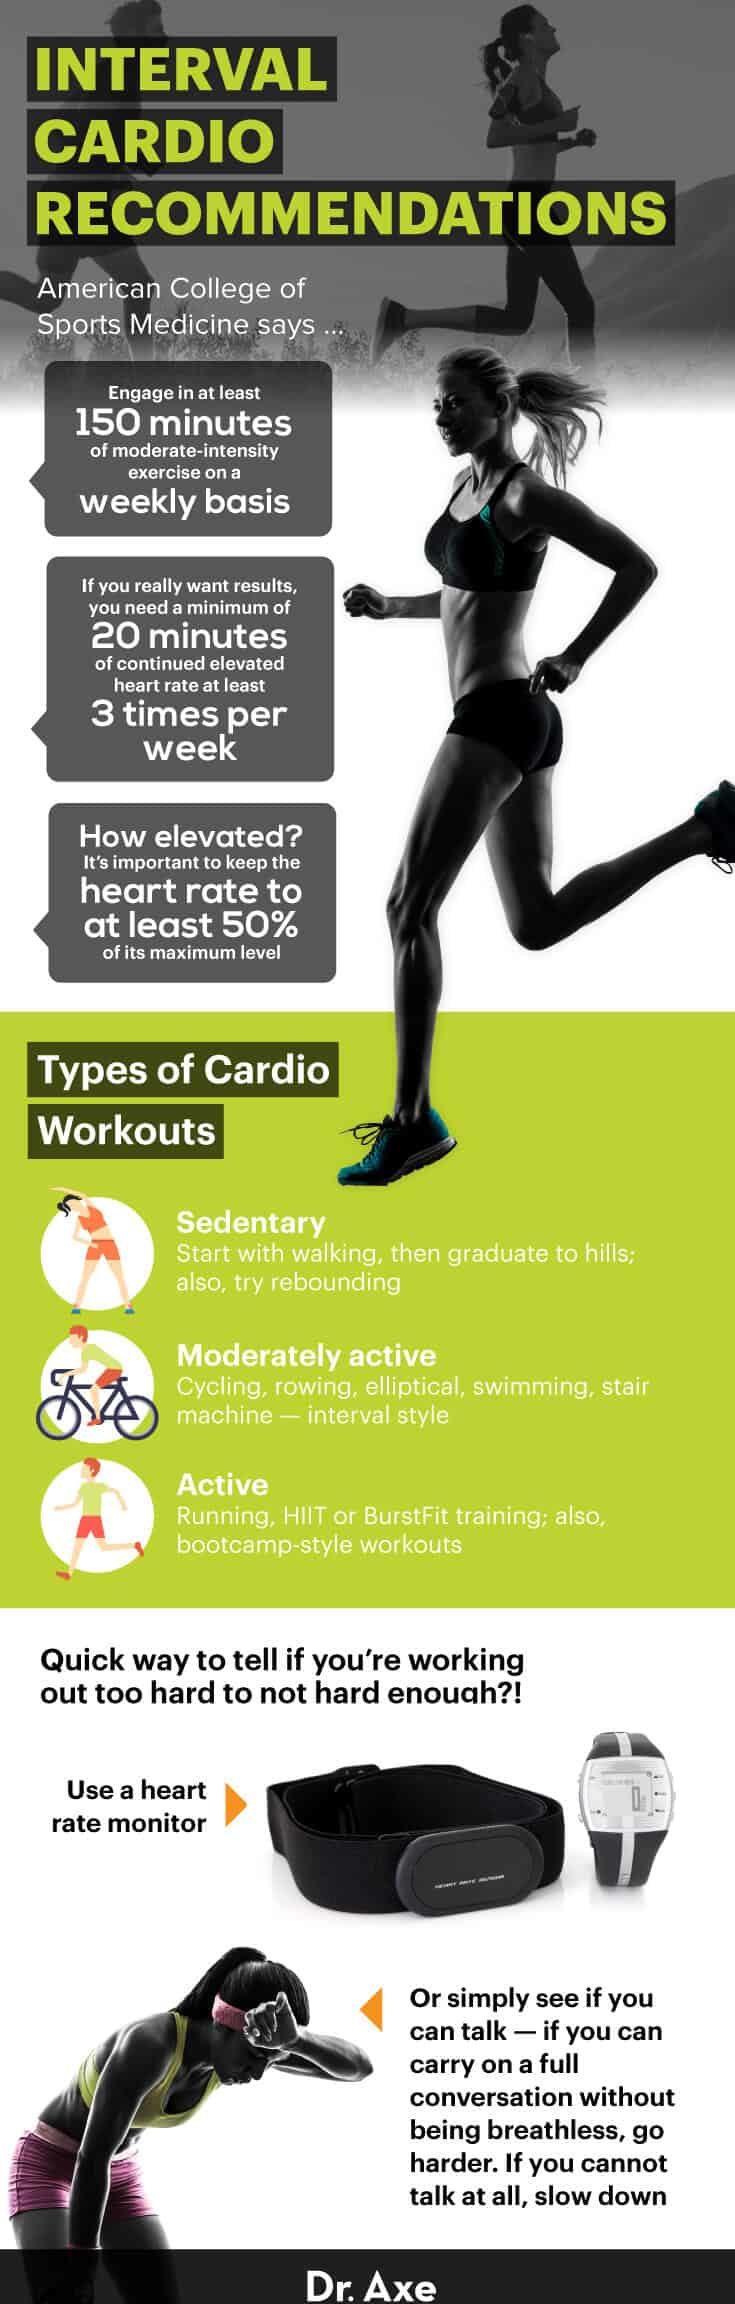 Best cardio workouts - Dr. Axe